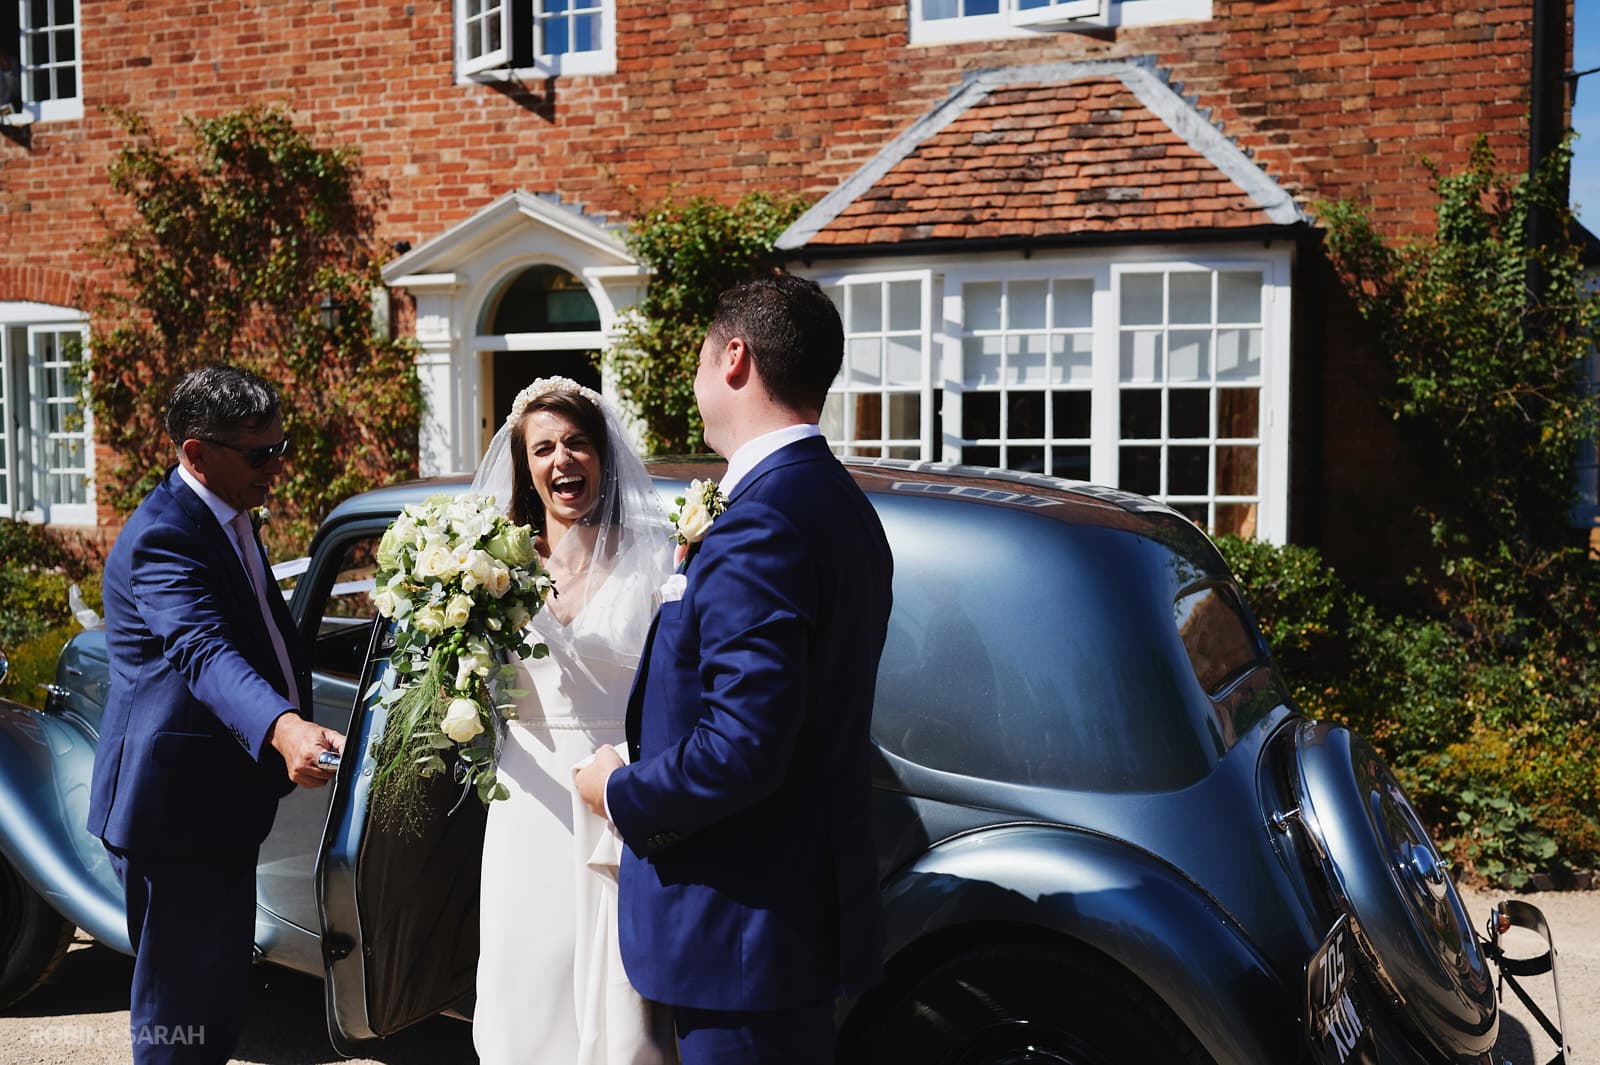 Bride laughing as she arrives with groom at Wethele Manor for wedding reception